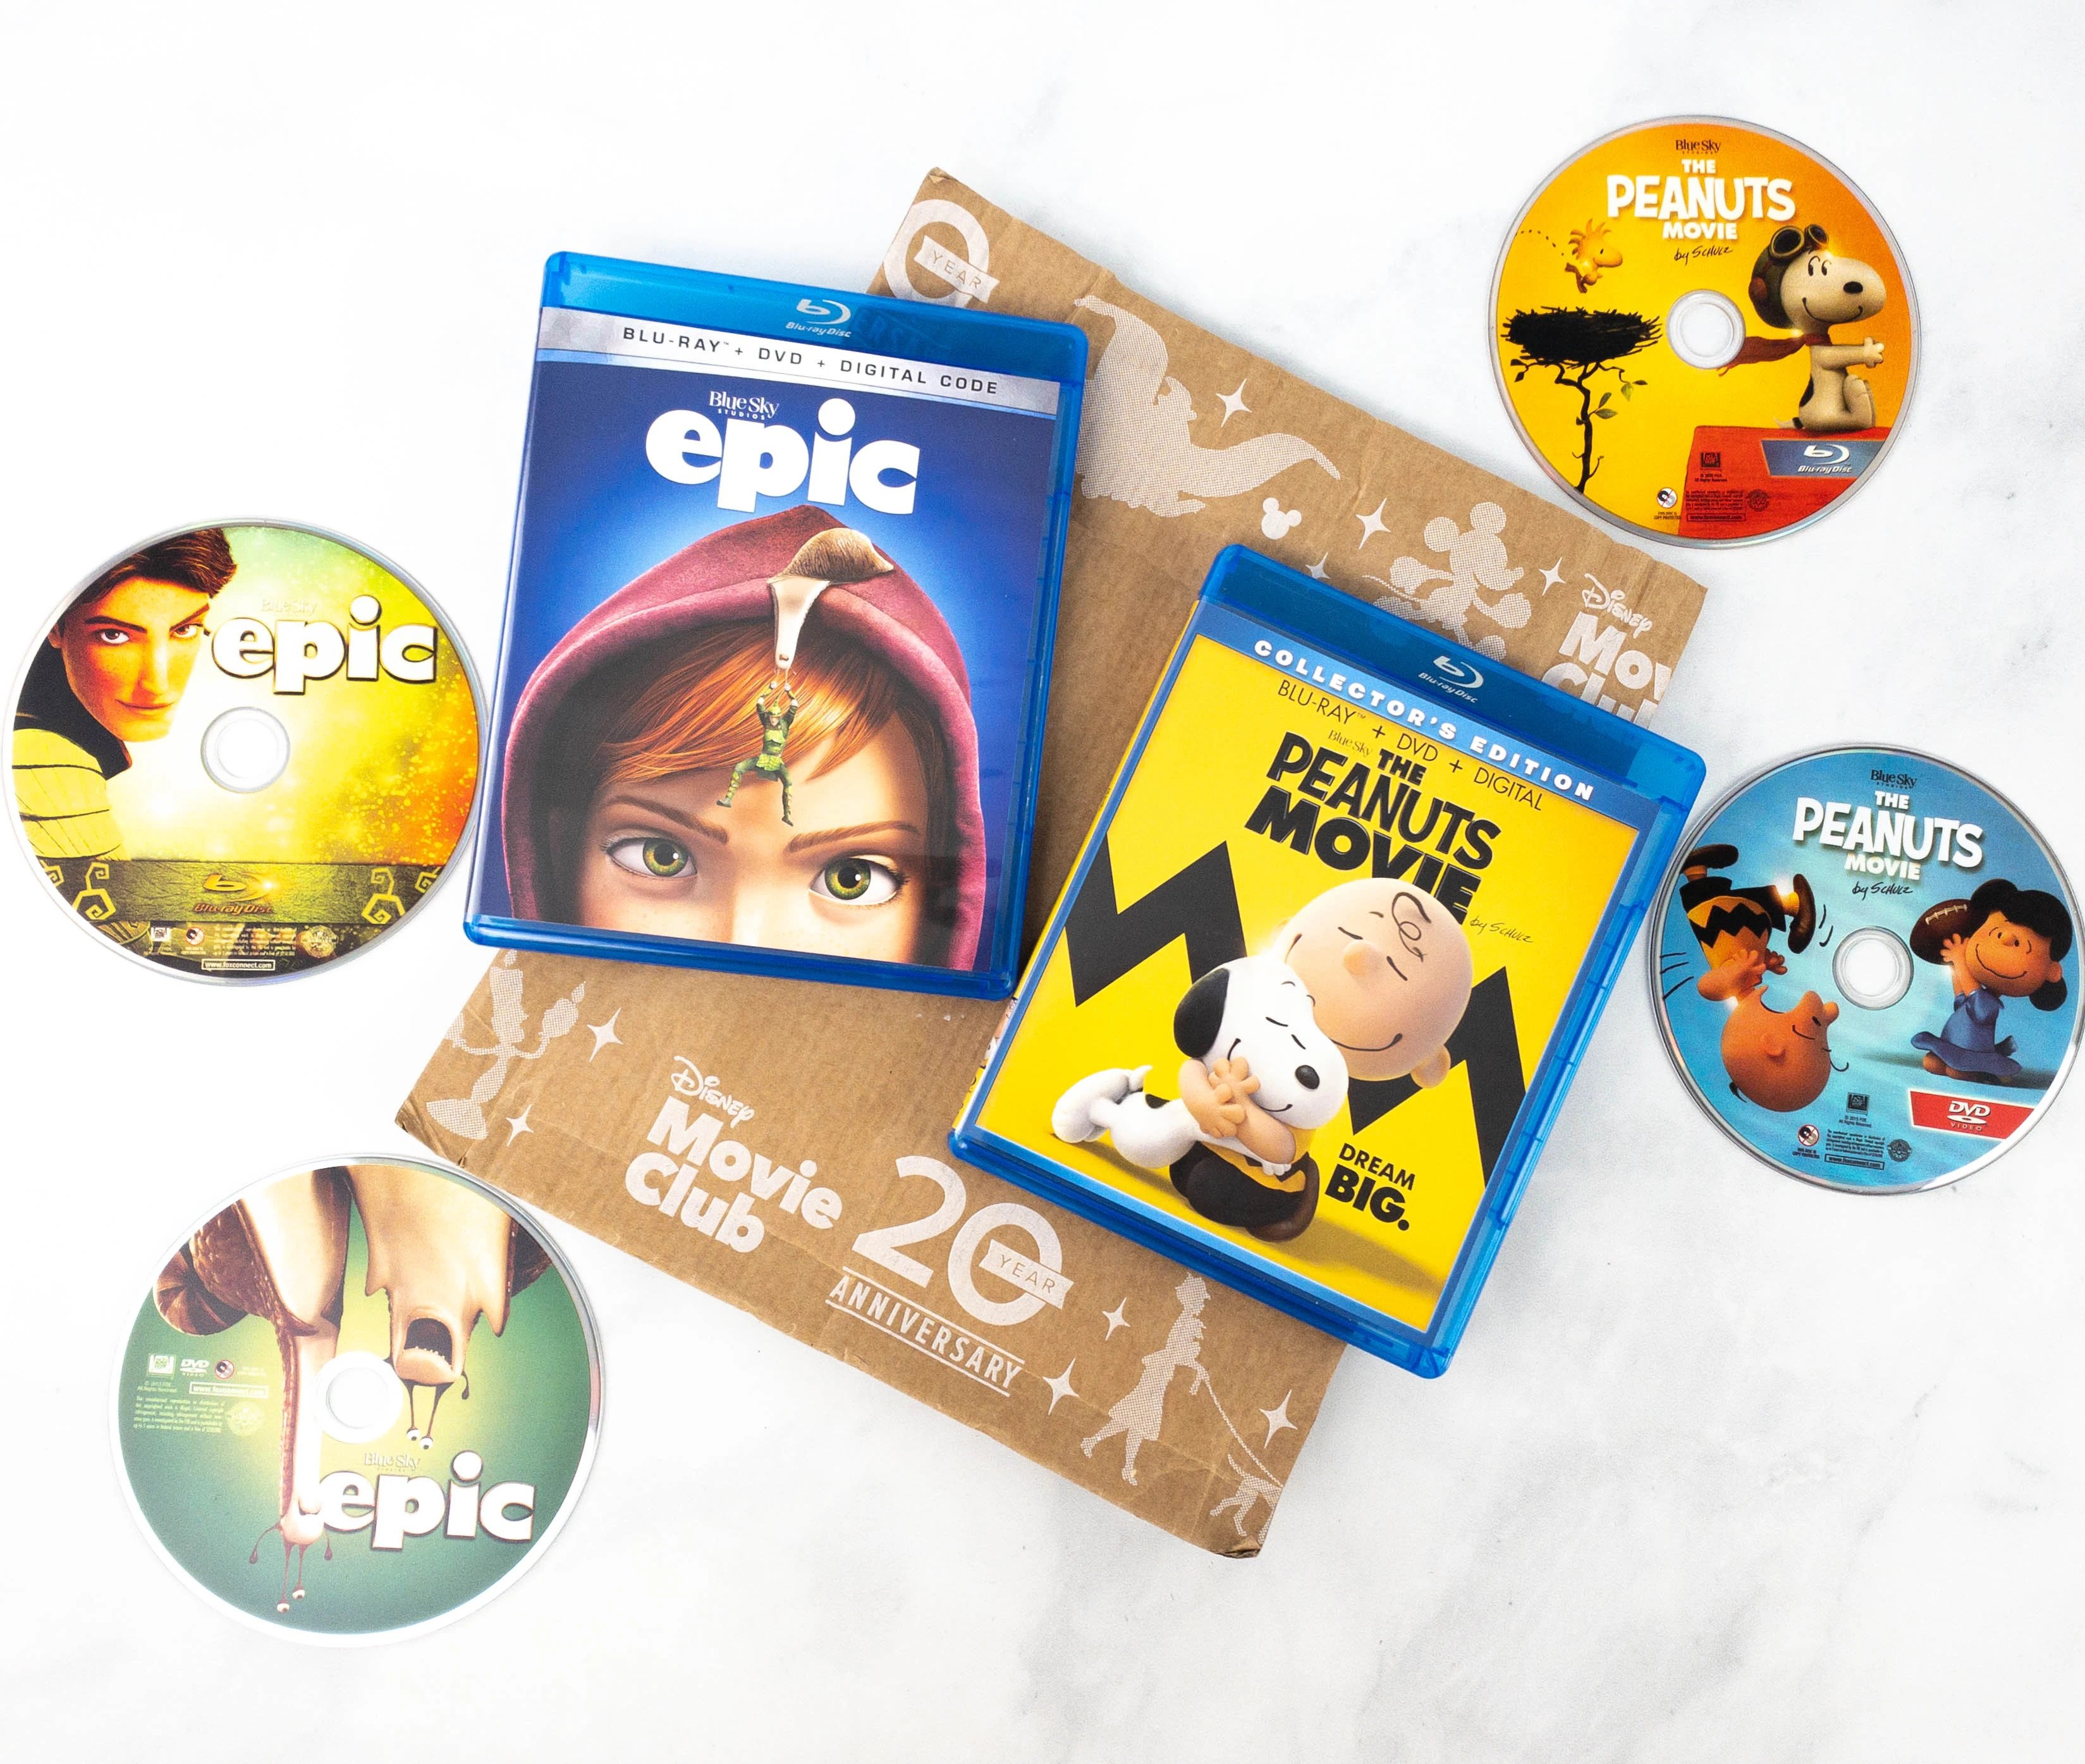 Disney Movie Club Reviews: Get All The Details At Hello Subscription!